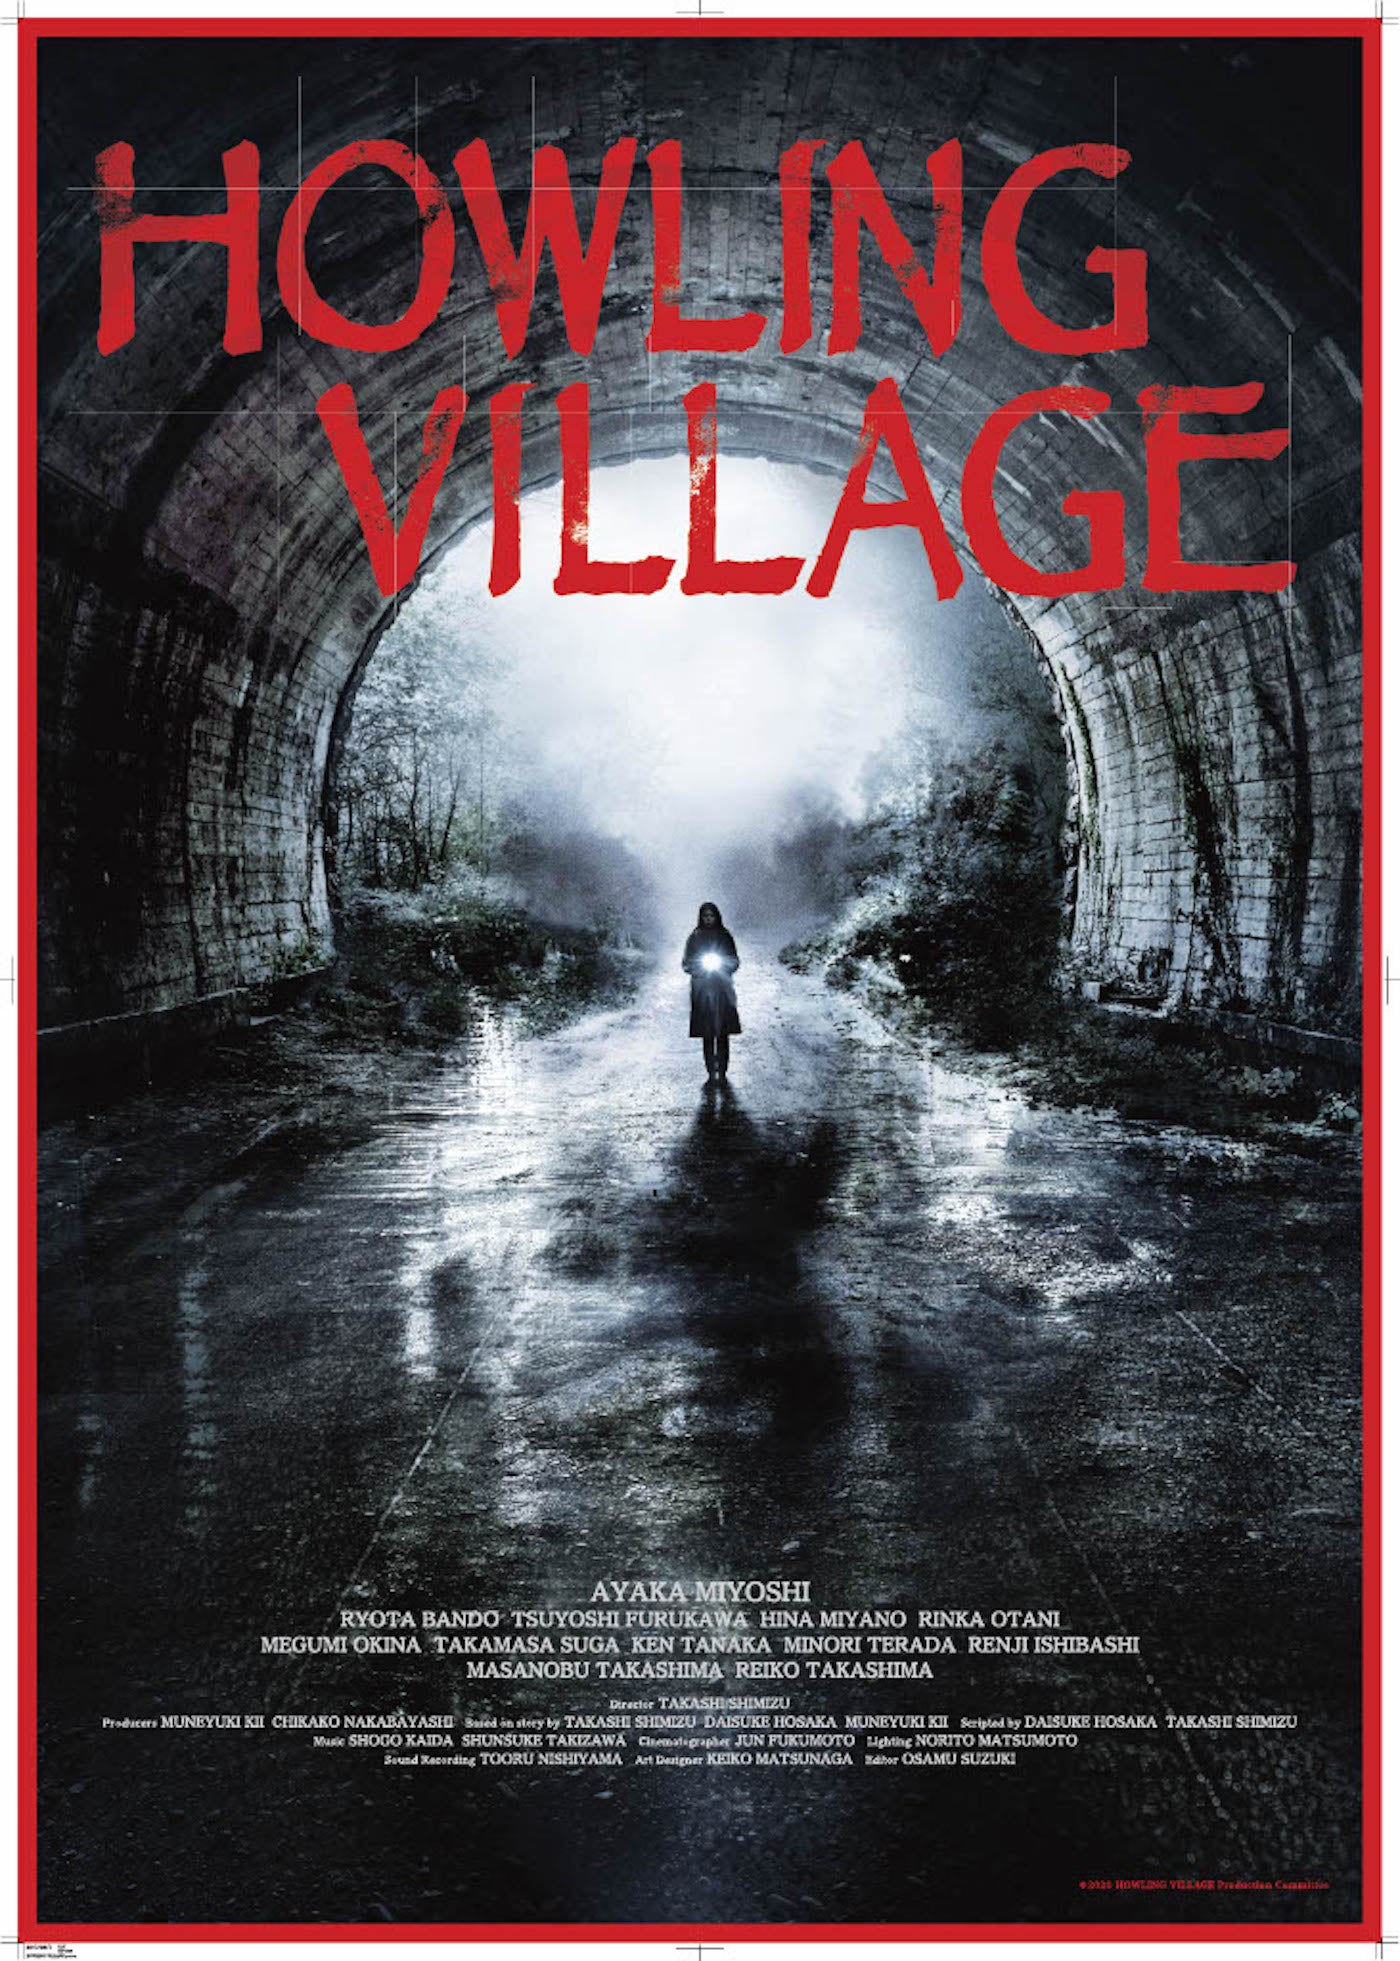 Howling Village [Blu-ray] cover art